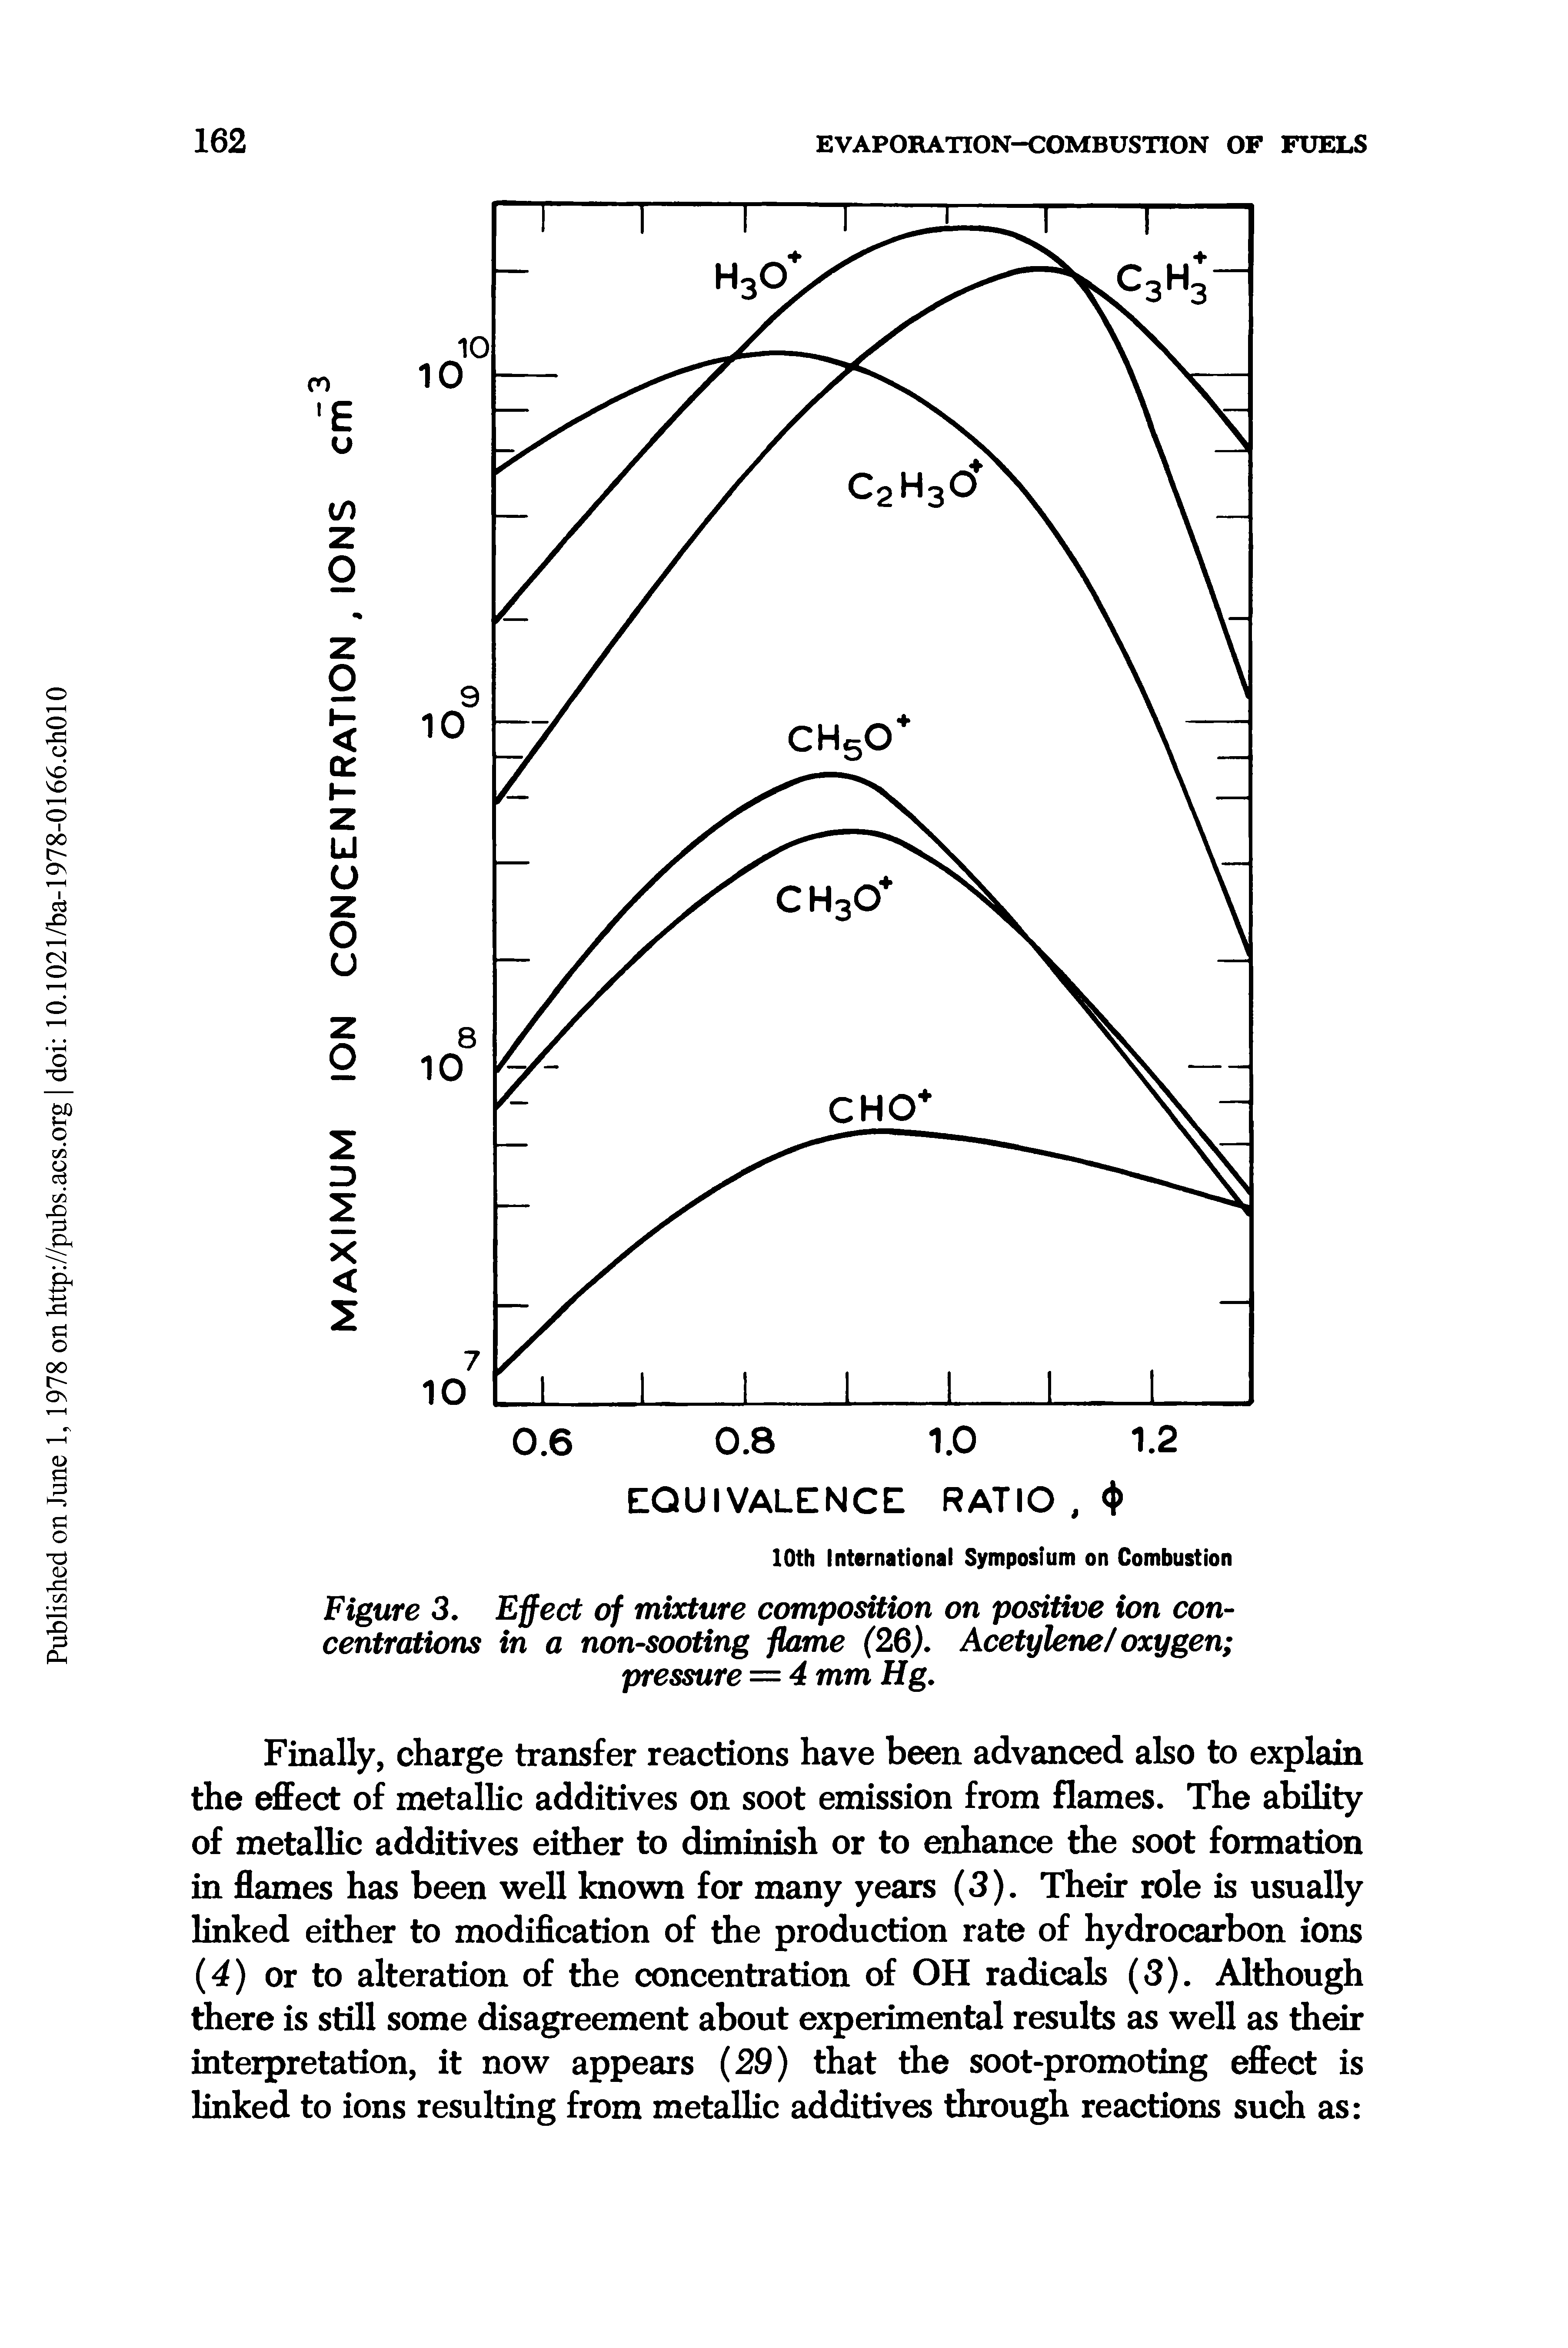 Figure 3. Effect of mixture composition on positive ion concentrations in a non-sooting flame (26). Acetylene/oxygen pressure = 4 mm Hg.